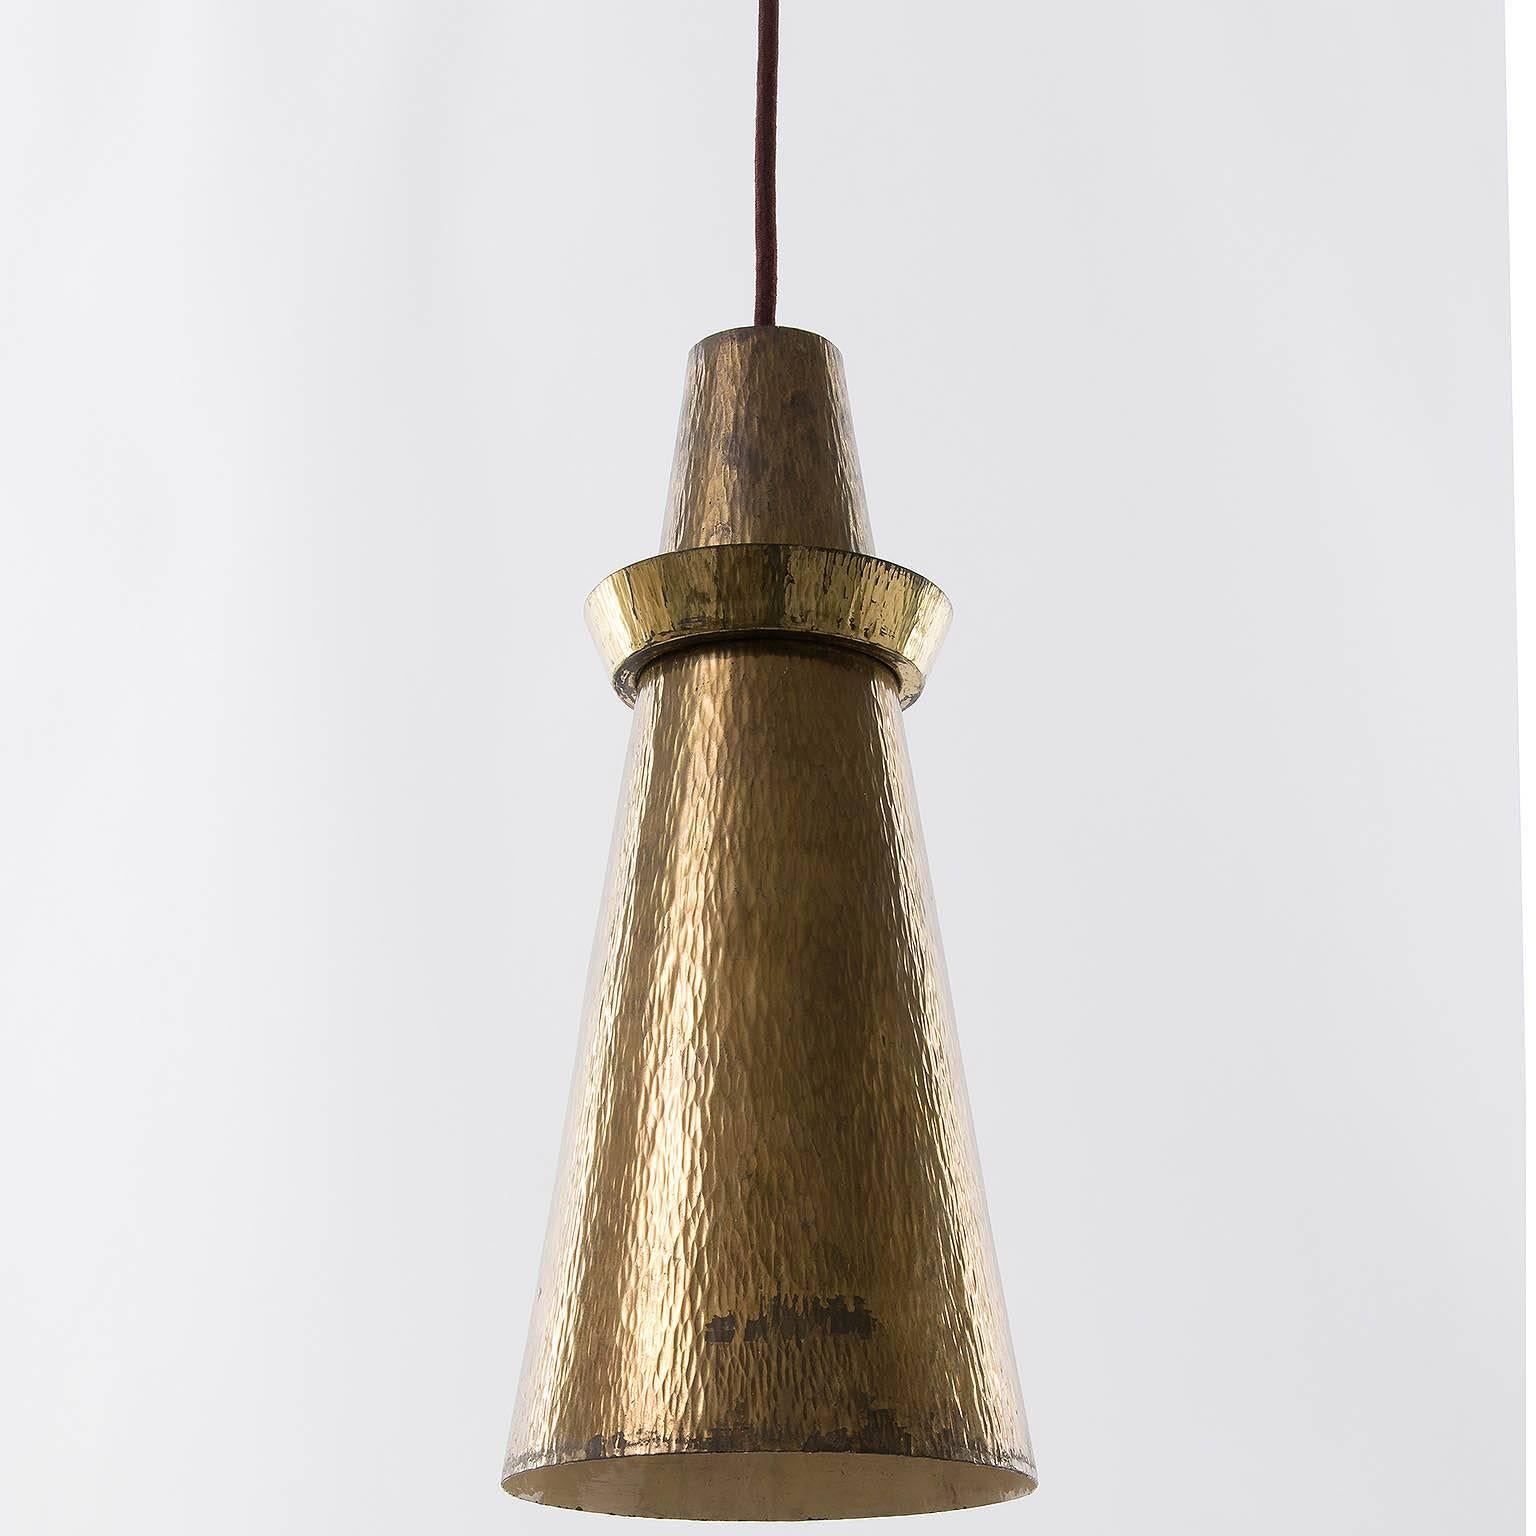 One of Six Pendant Lights, Hammered Patinated Brass, 1960s In Good Condition For Sale In Hausmannstätten, AT